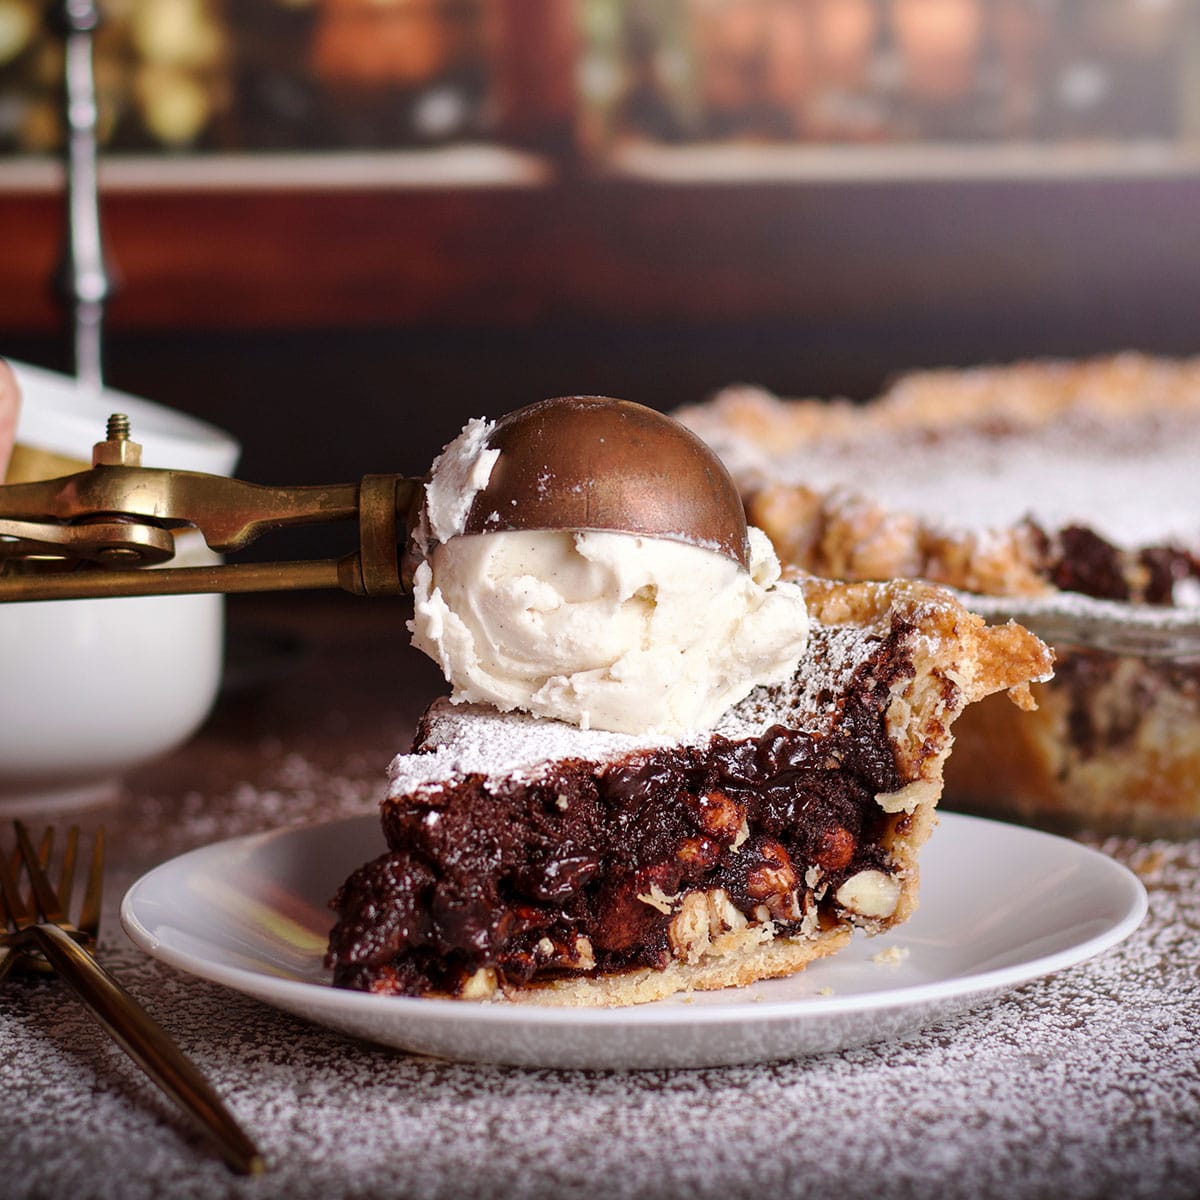 Someone using an old fashioned ice cream scoop to top a slice of chocolate almond pie with a scoop of vanilla ice cream.